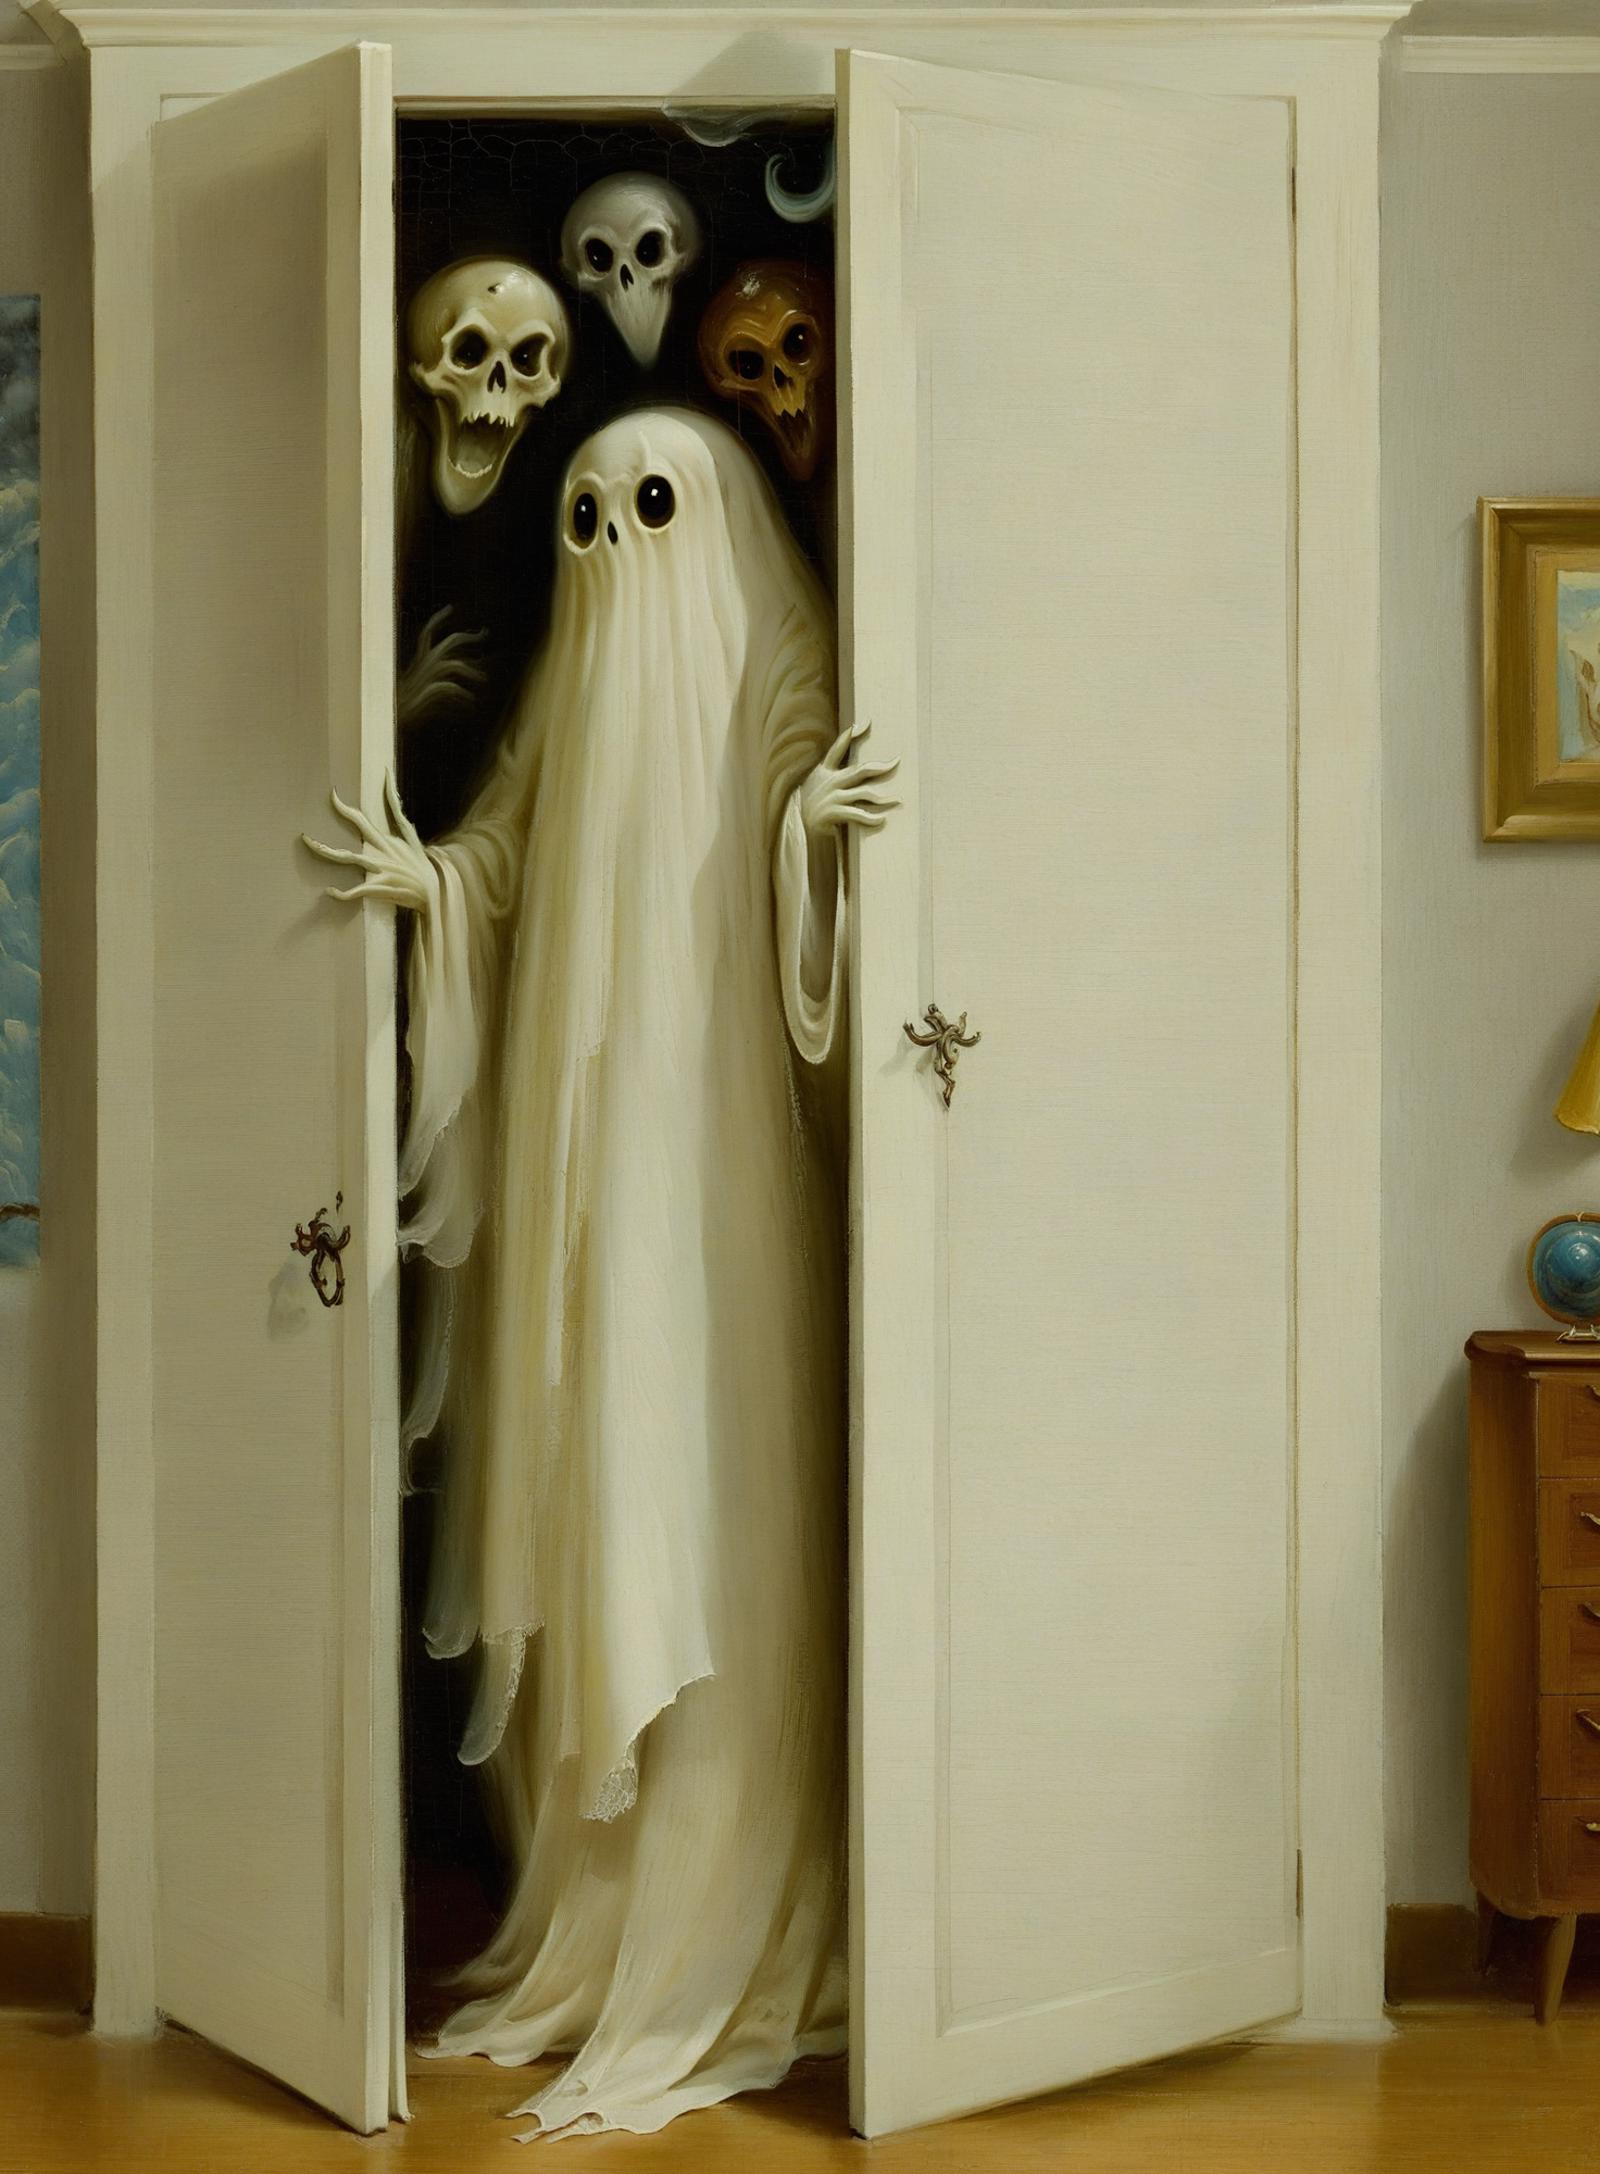 A painting of a ghost standing in a closet with skulls above it.